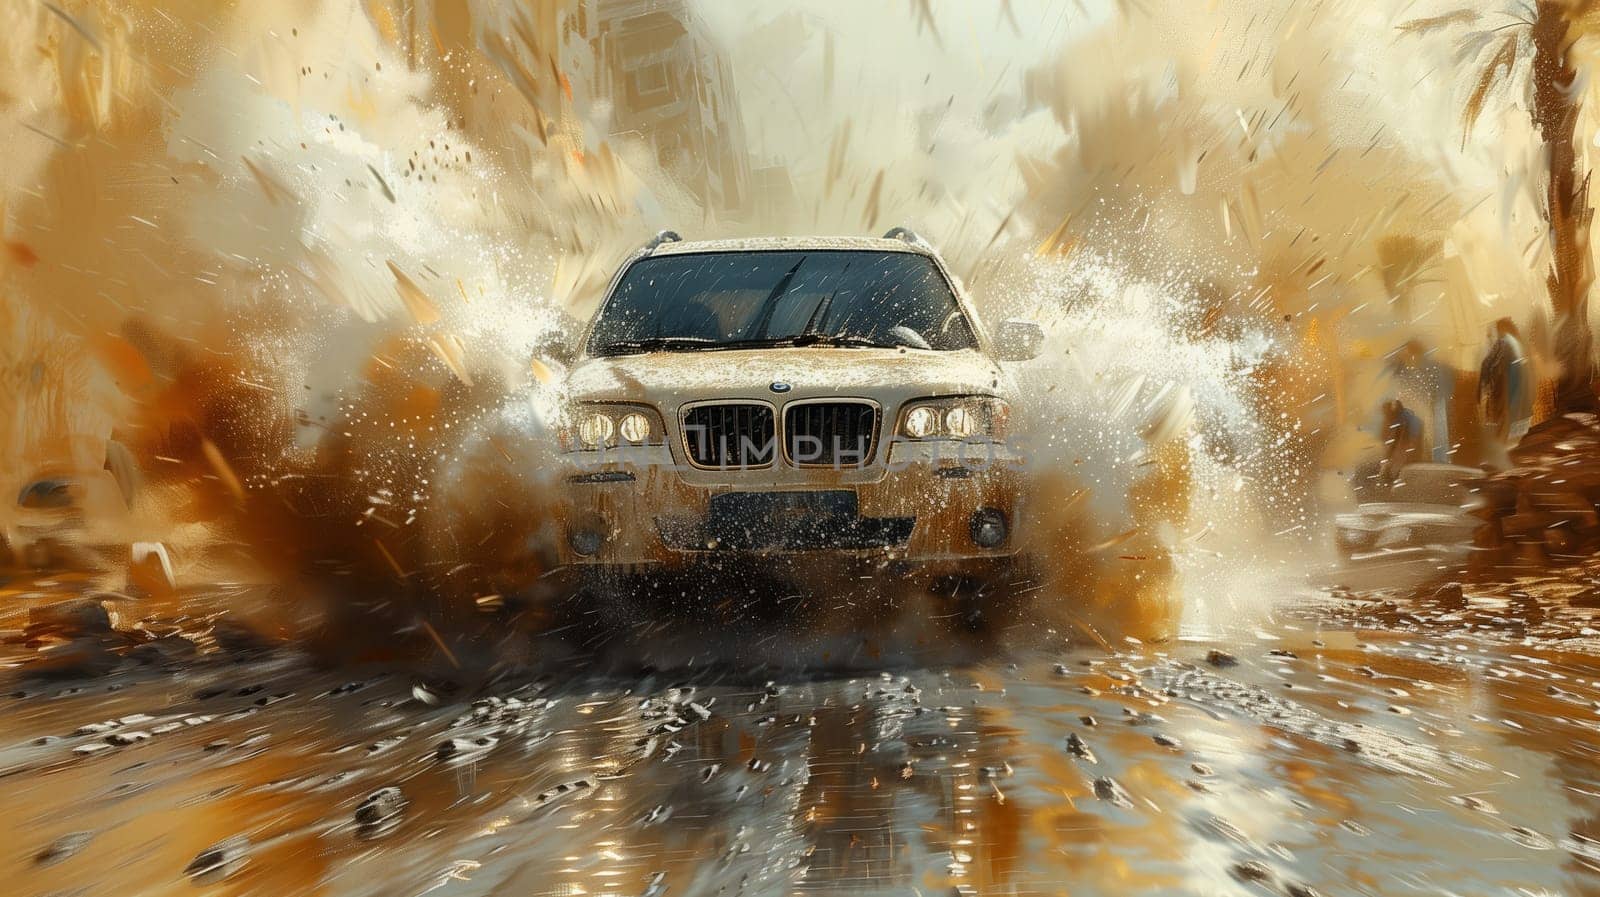 A white SUV navigates through a rugged, muddy road with water splashing on its tires. The vehicles hood is covered in mud as it showcases its offroad capabilities